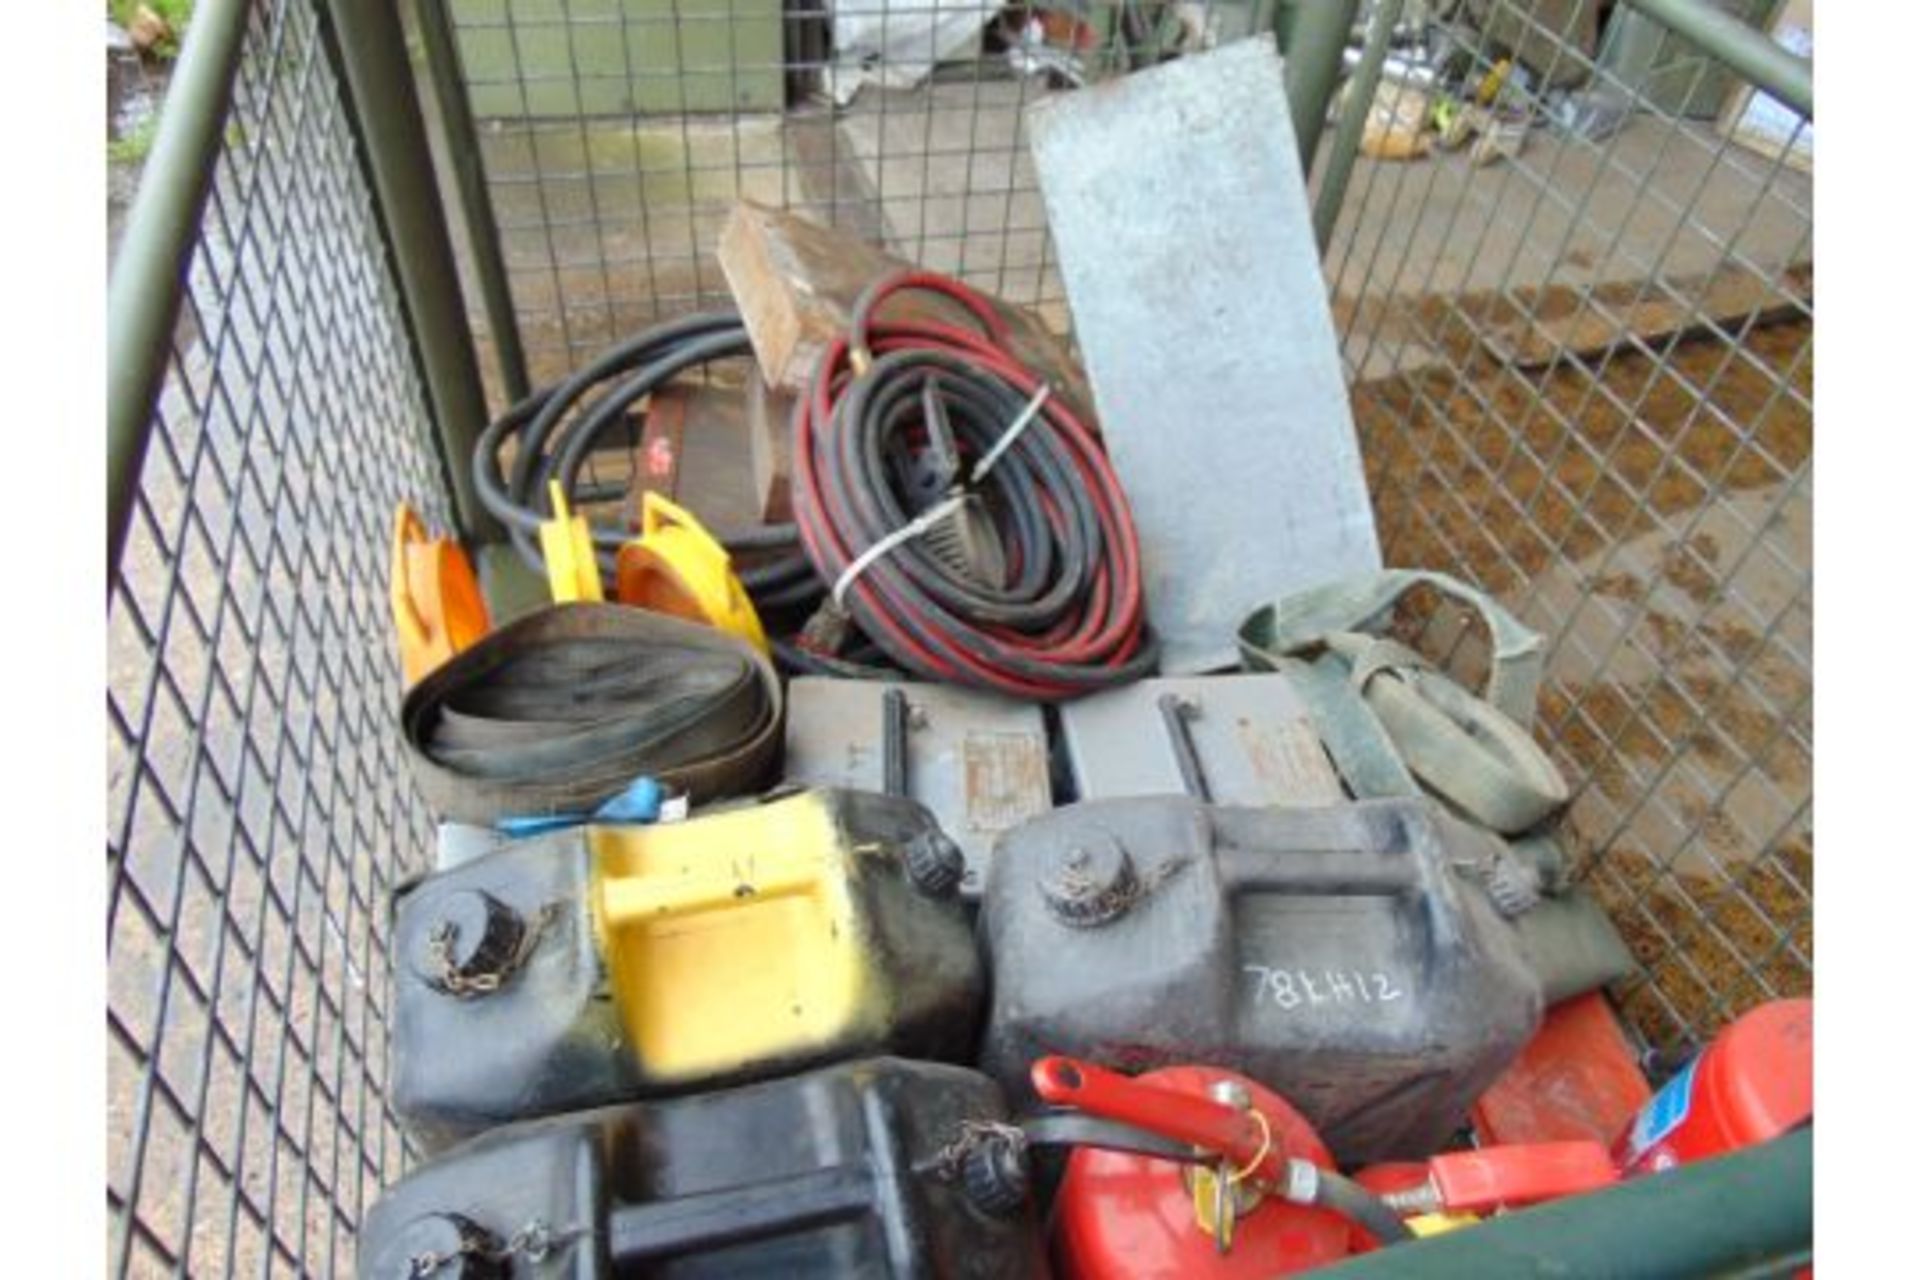 1 x Stillage Air Lines Wheel Chocks, Jerry Cans, Cooking Vessels, Ratchet Straps, Fire Extinguisher - Image 4 of 5